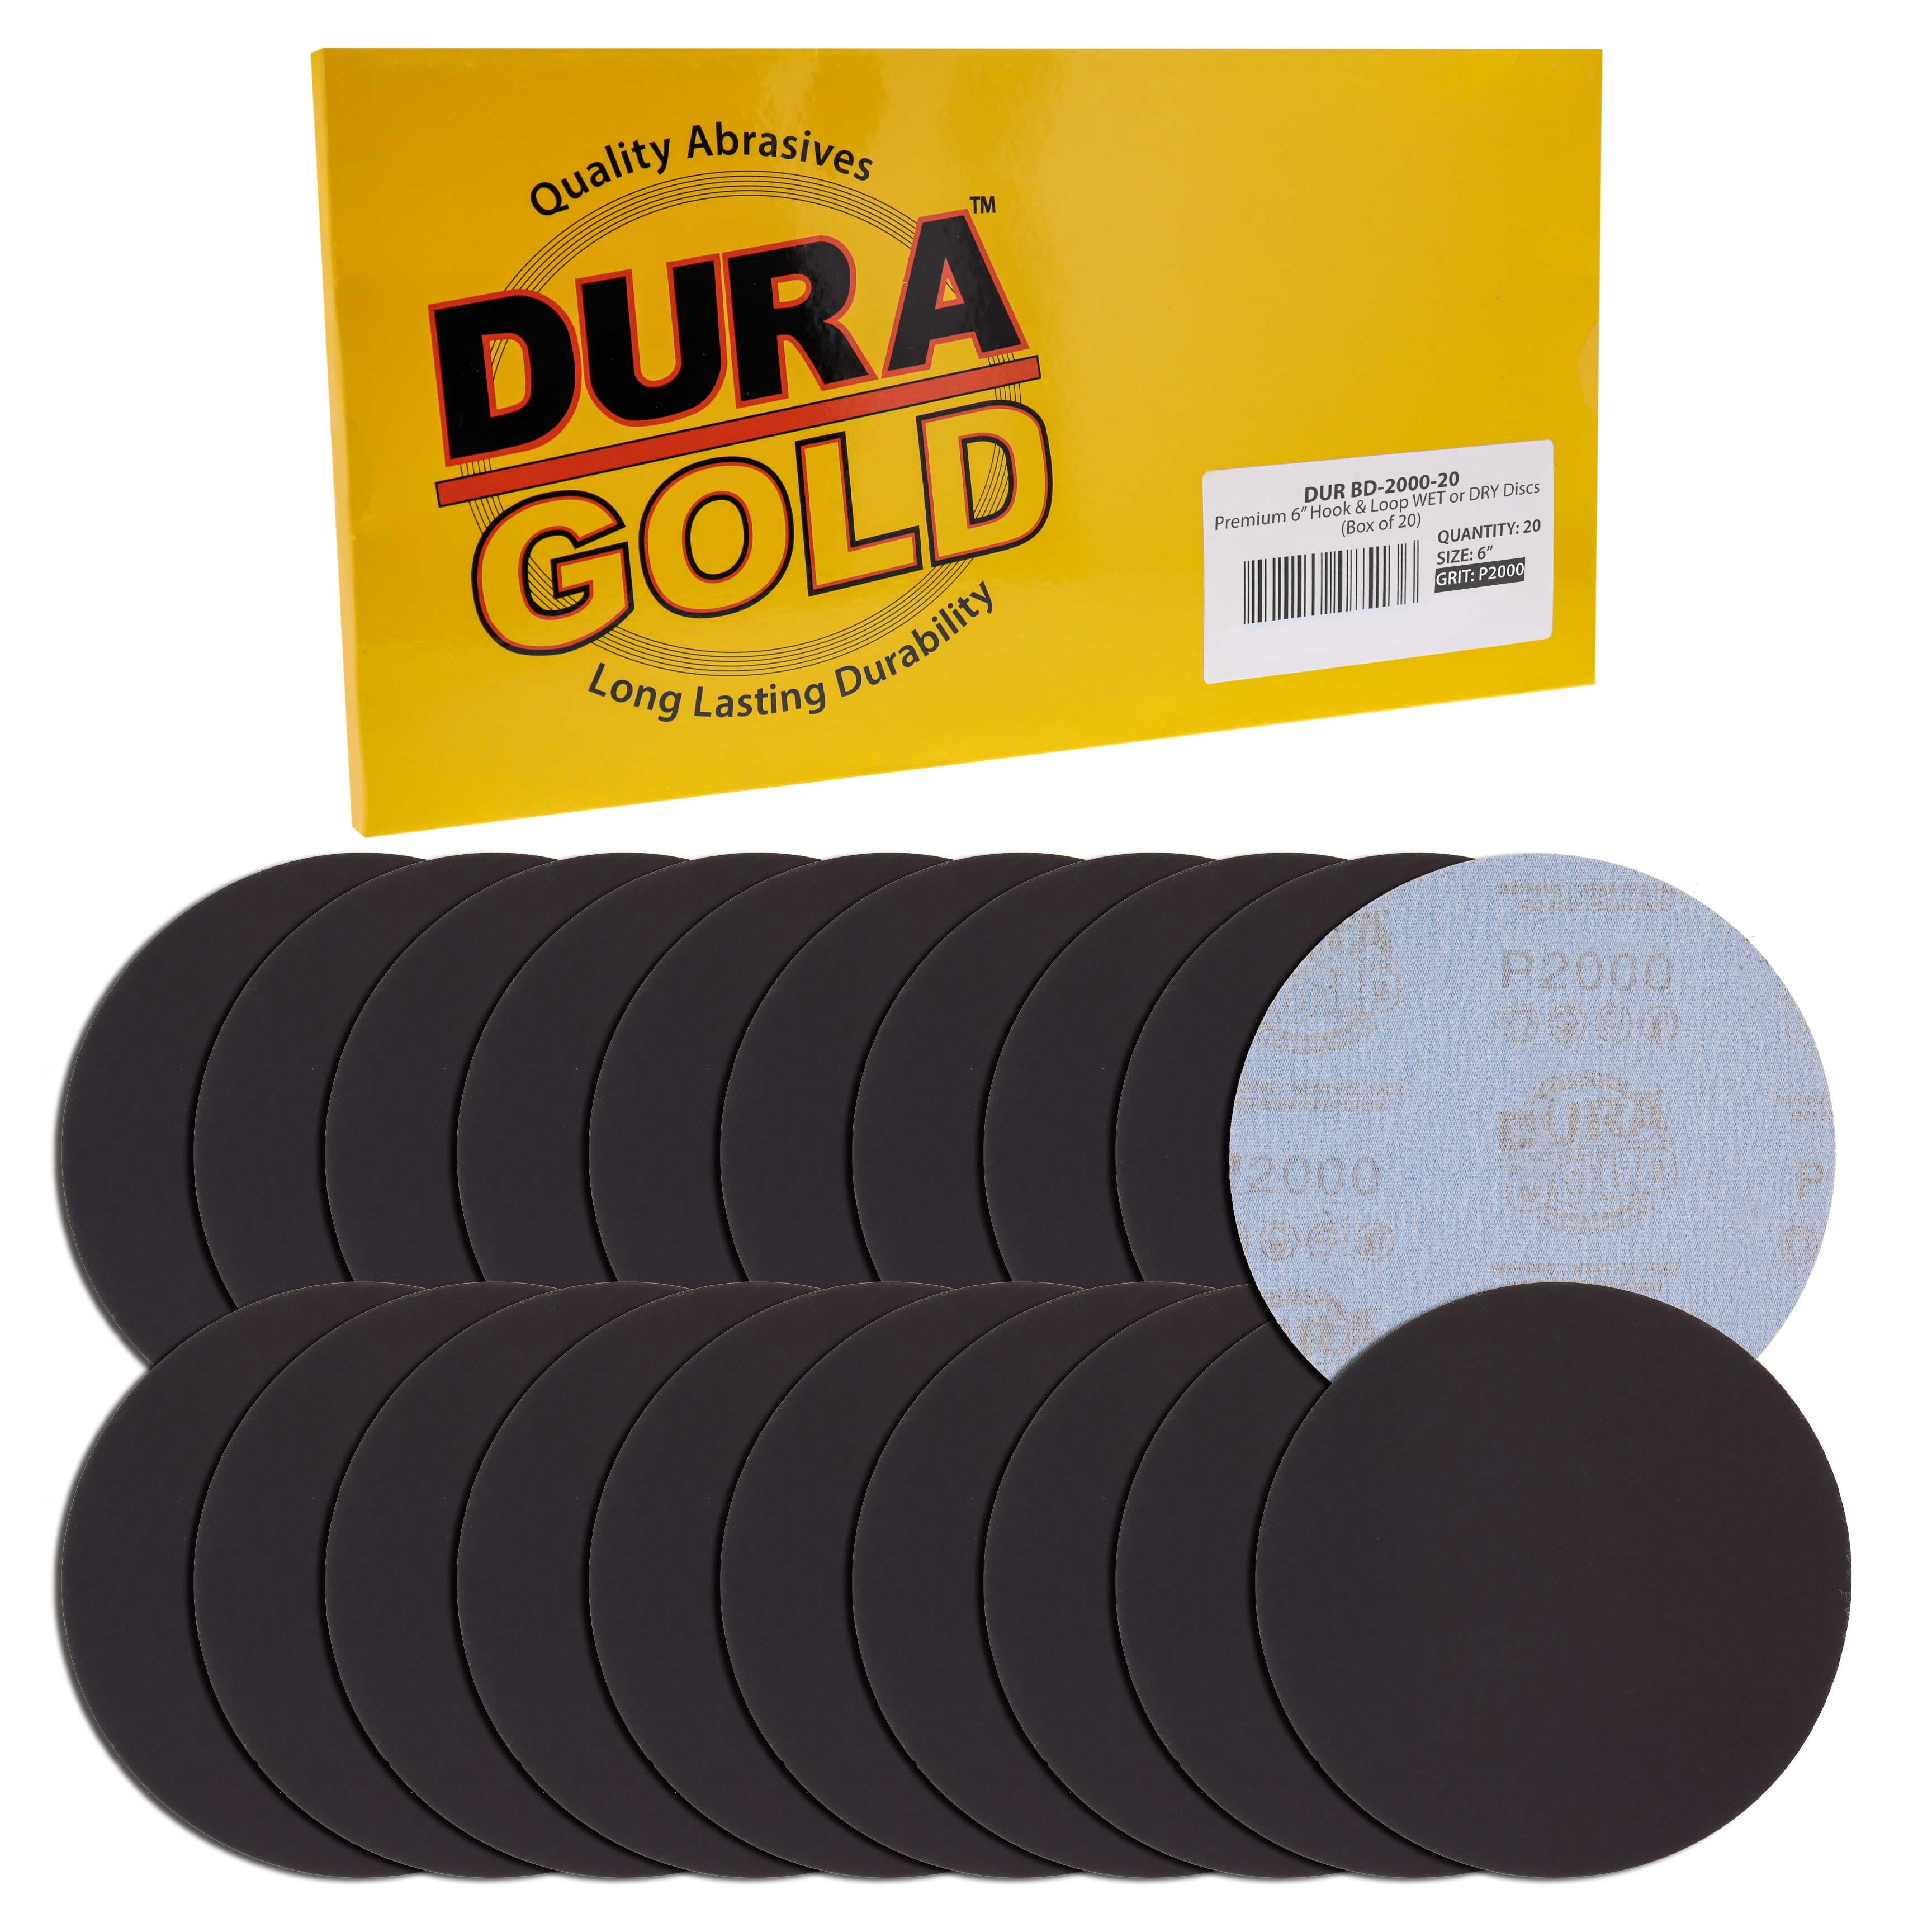 Dura-Gold Premium 6 Wet or Dry Sanding Discs - 1000 Grit, Box of 20 -  High-Performance Sandpaper Discs with Hook & Loop Backing, Fast Cutting  Silicon Carbide, Color Sanding Sander, Car Auto Polishing 